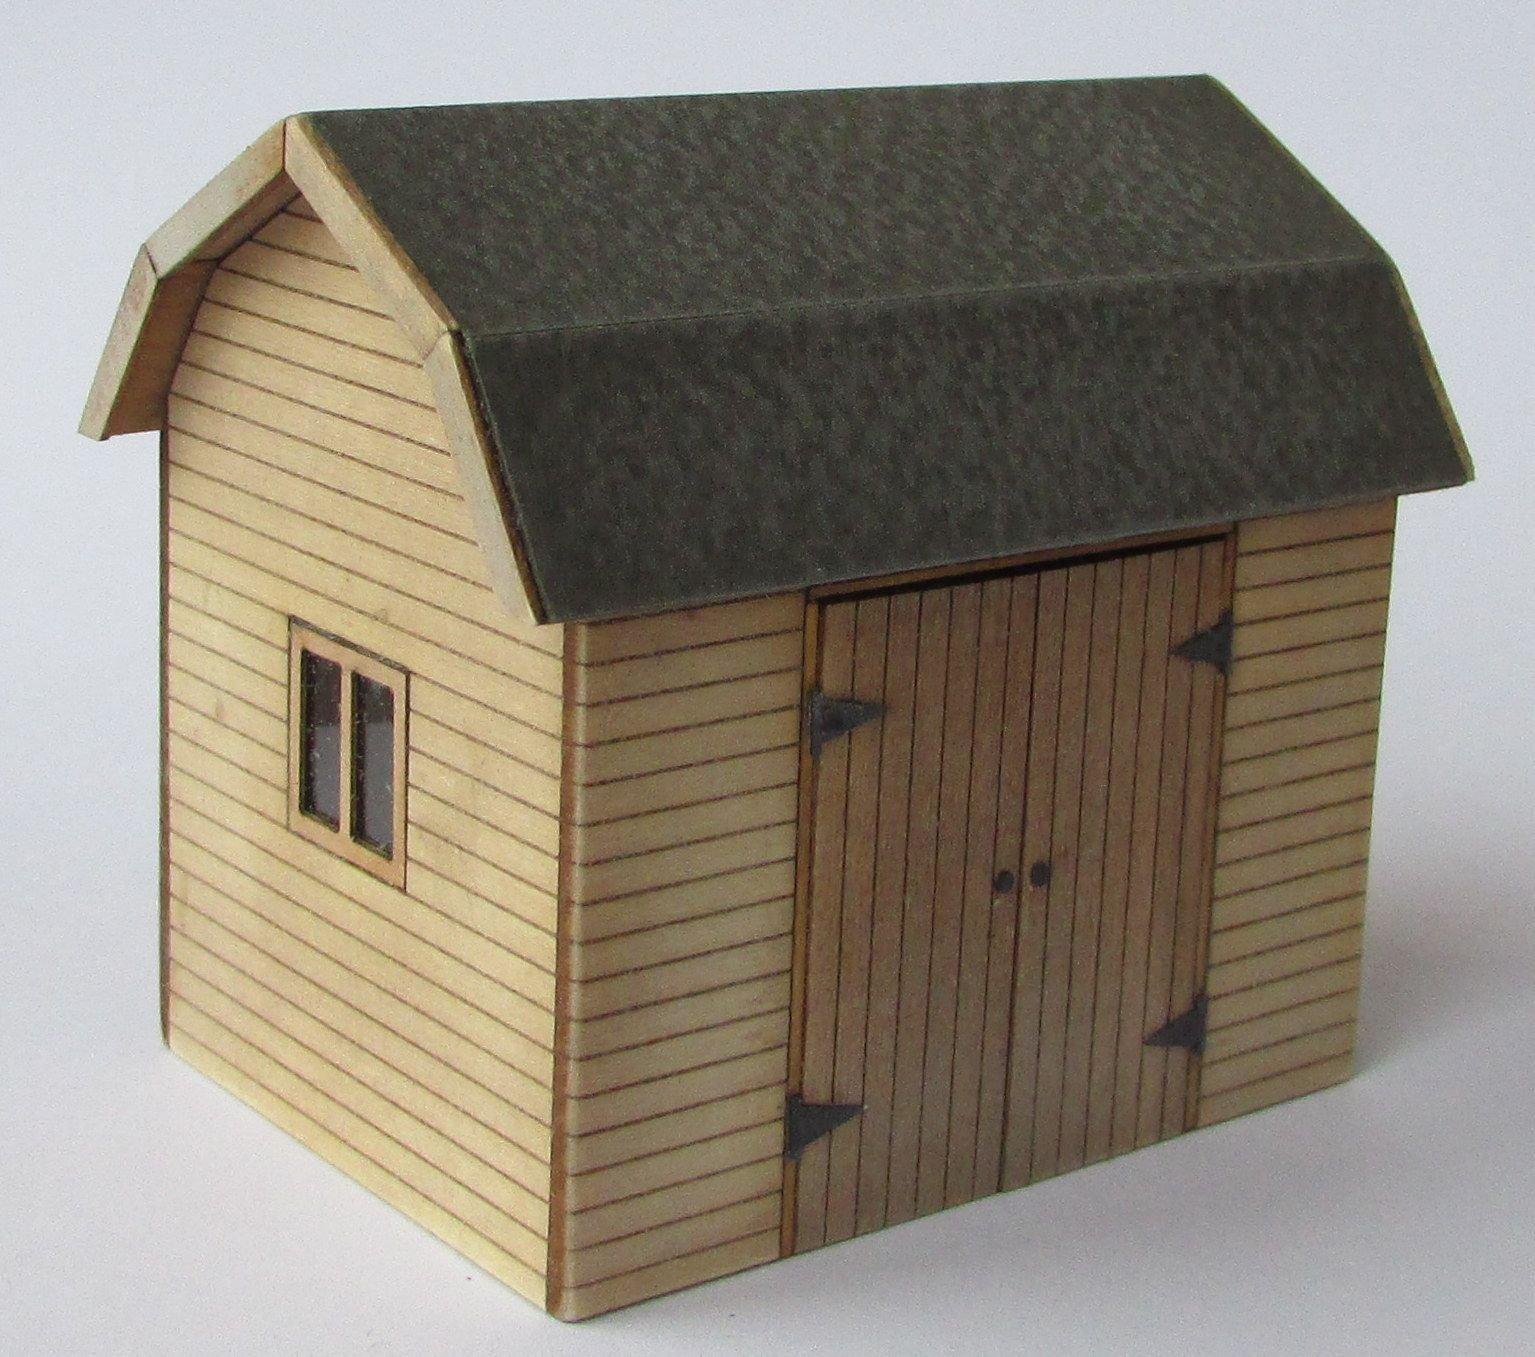 1/48th scale Dutch Workshop or Shed Kit